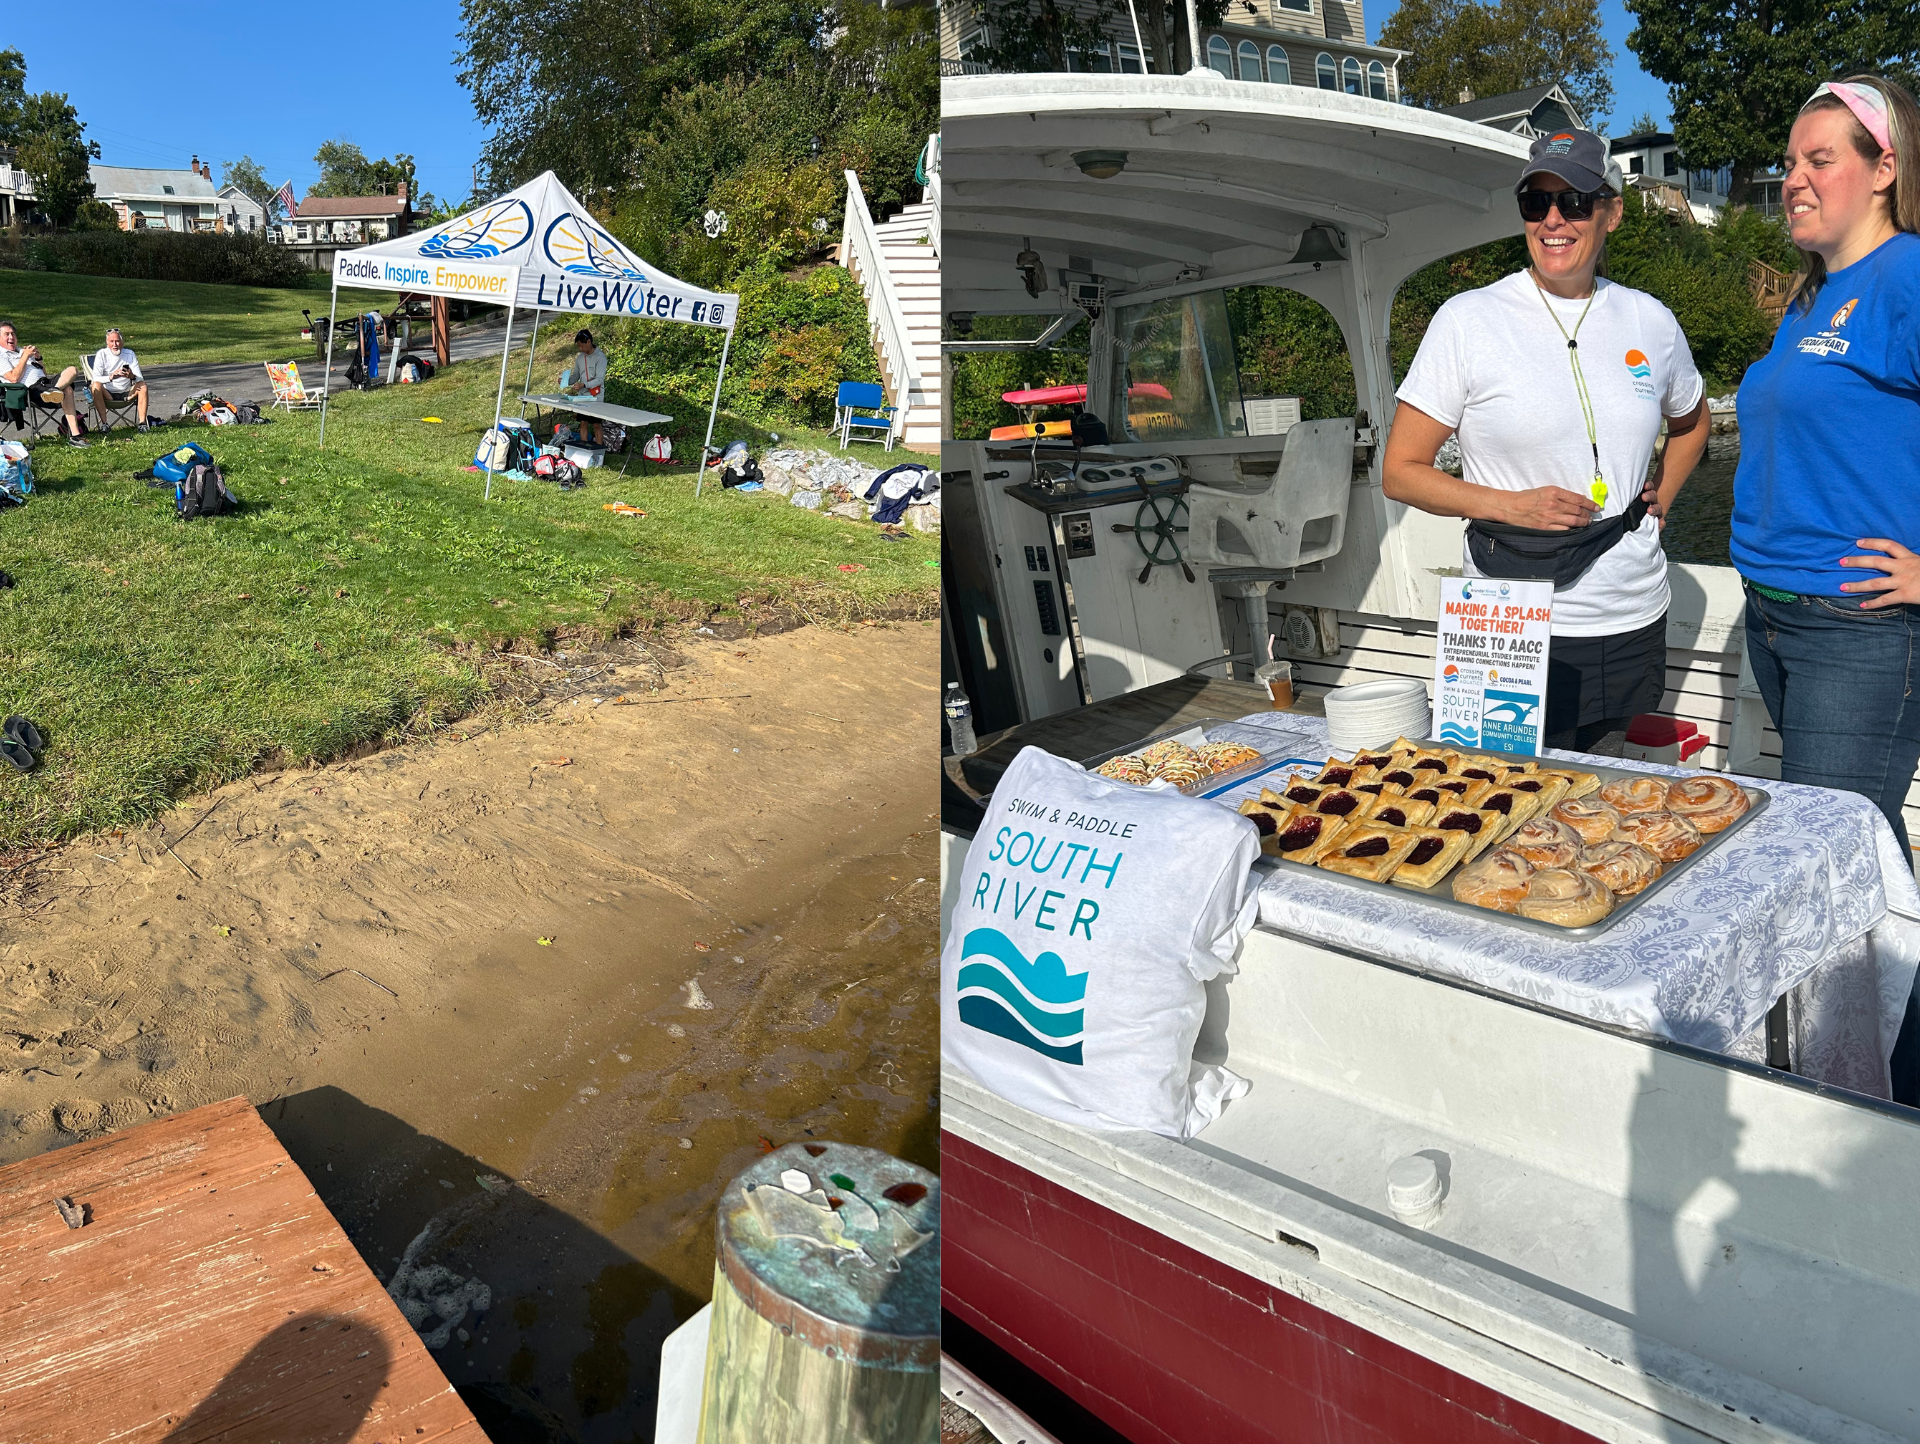 On the left, a tent by the beach displays the "live water foundation" logo. On the right, two women stand in front of pastries on a boat.